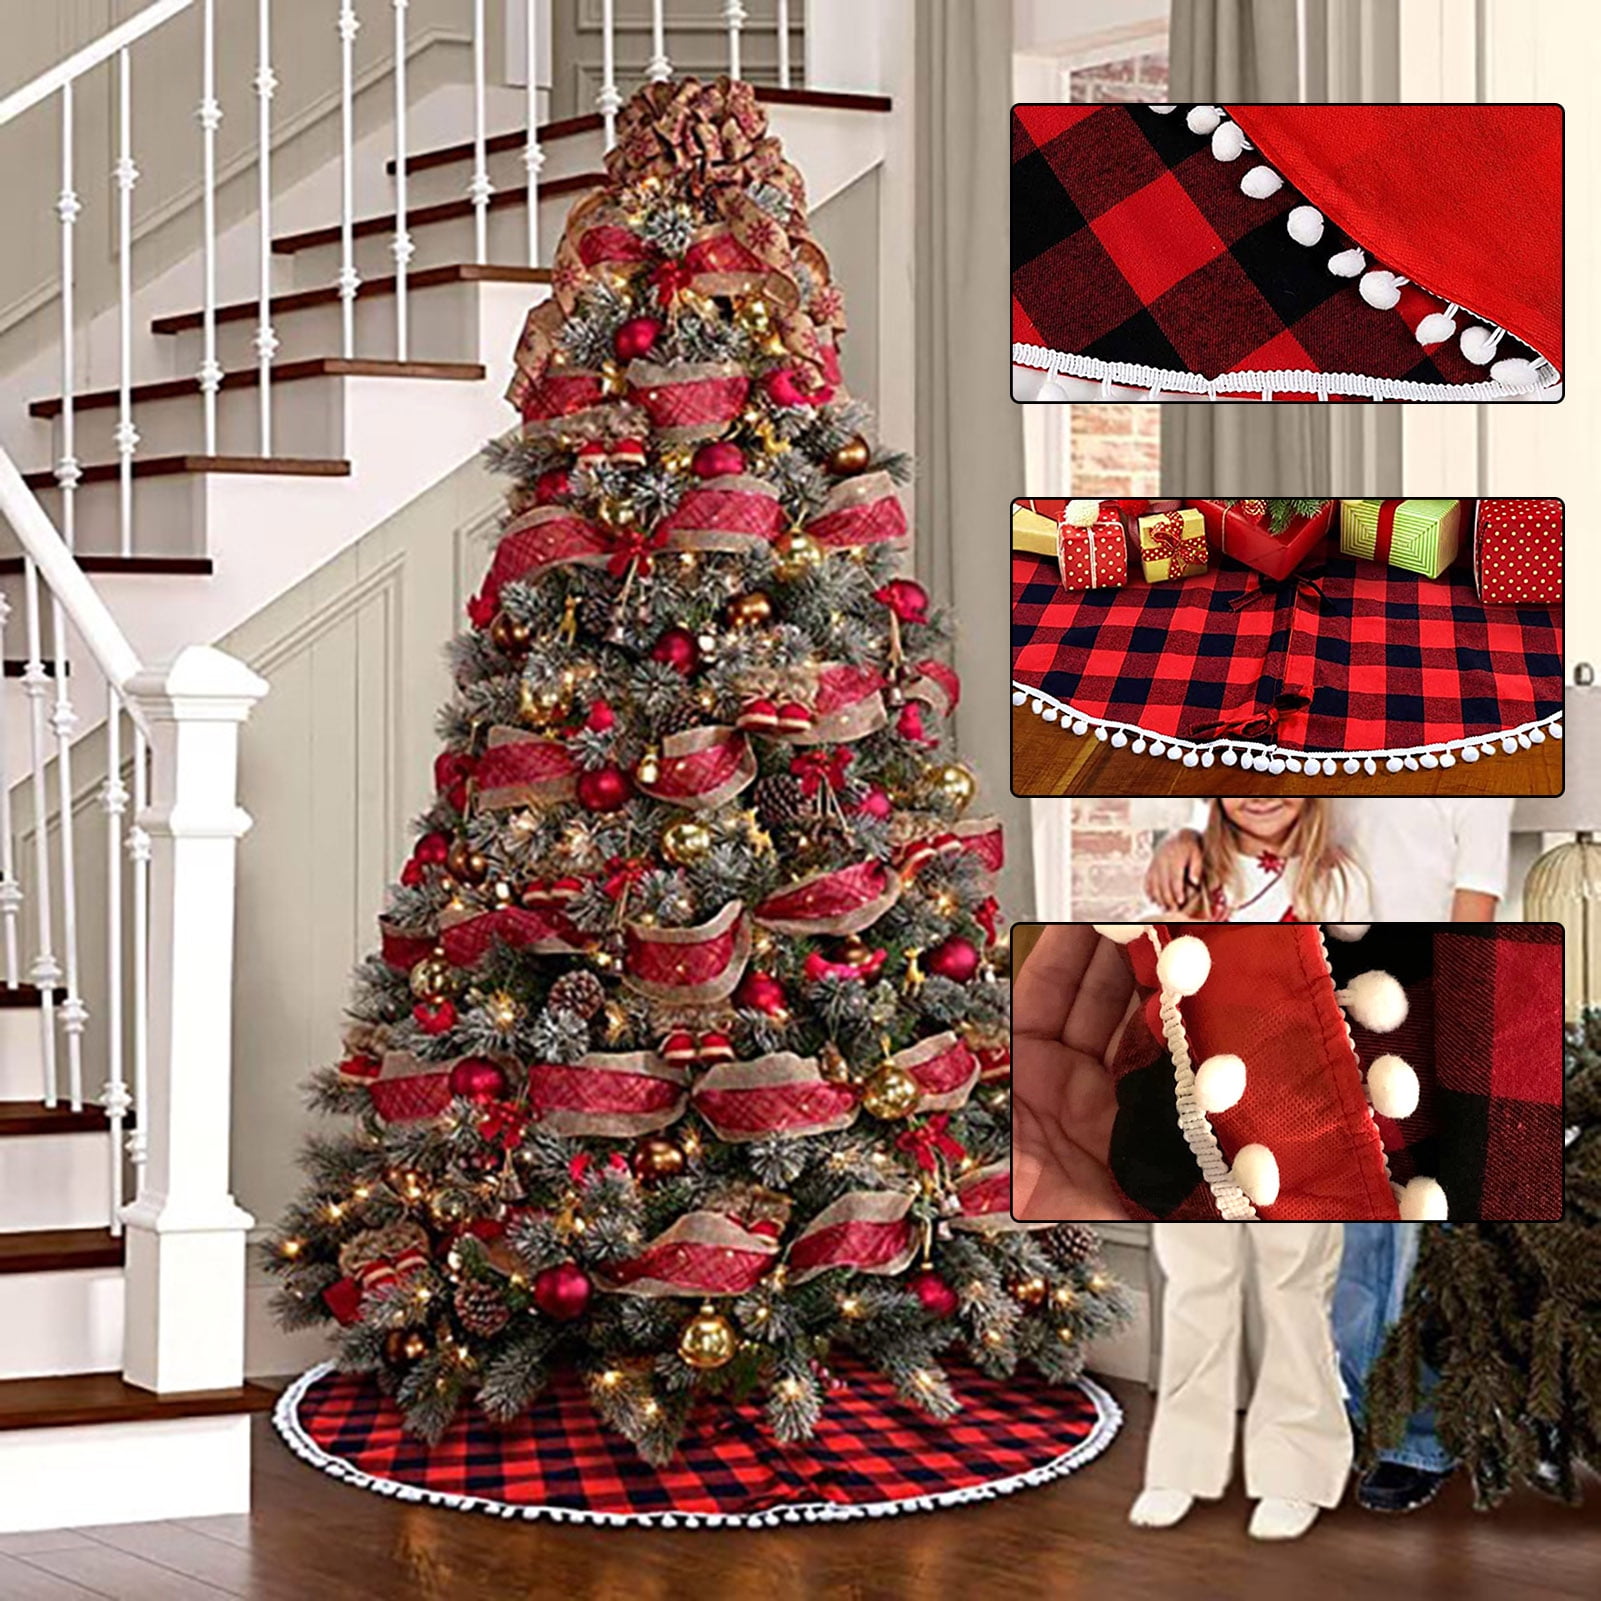 25 Christmas Tree Decorating Ideas That Are Beautiful And Festive – May the  Ray